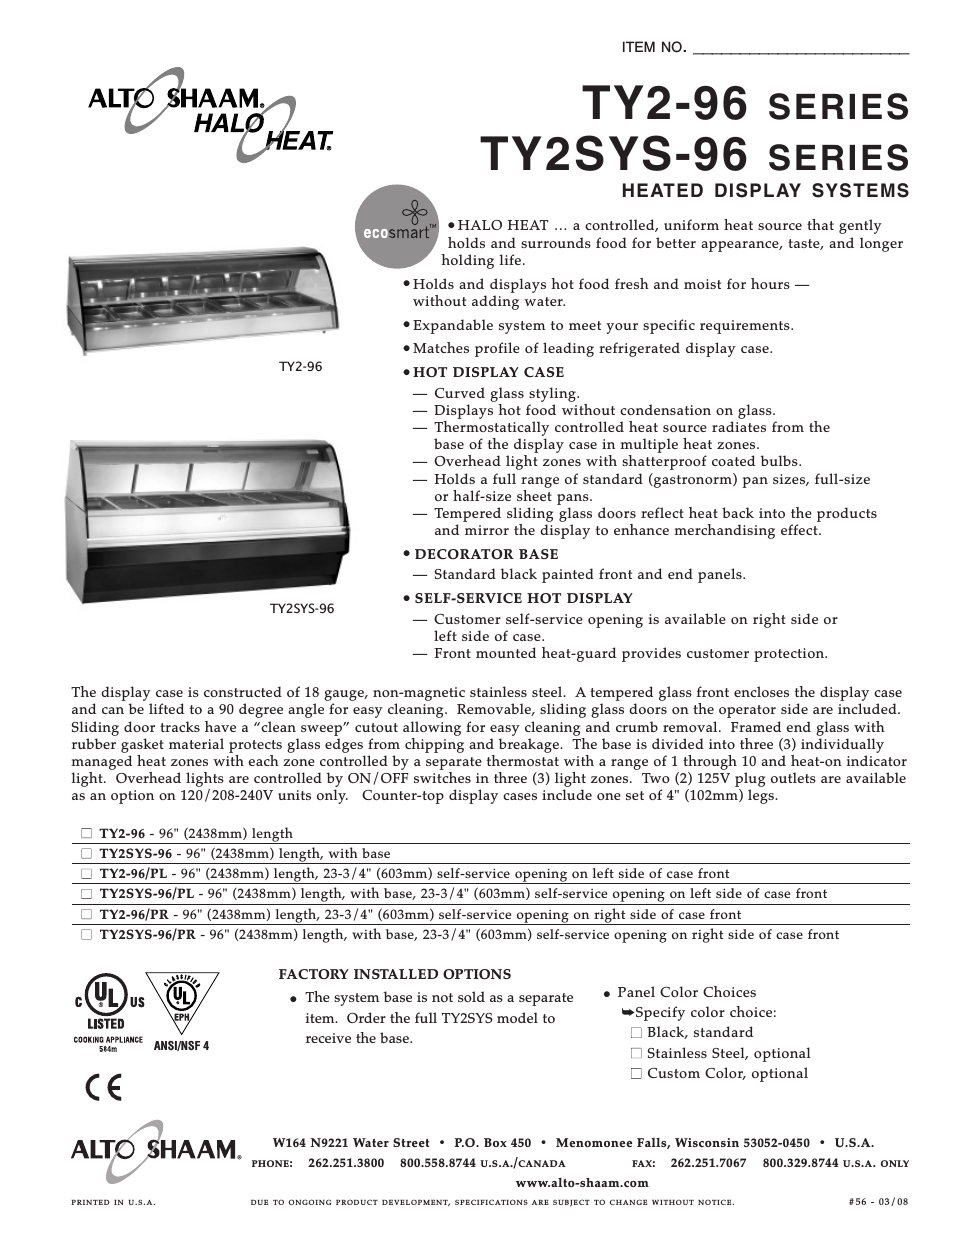 TY2SYS-96